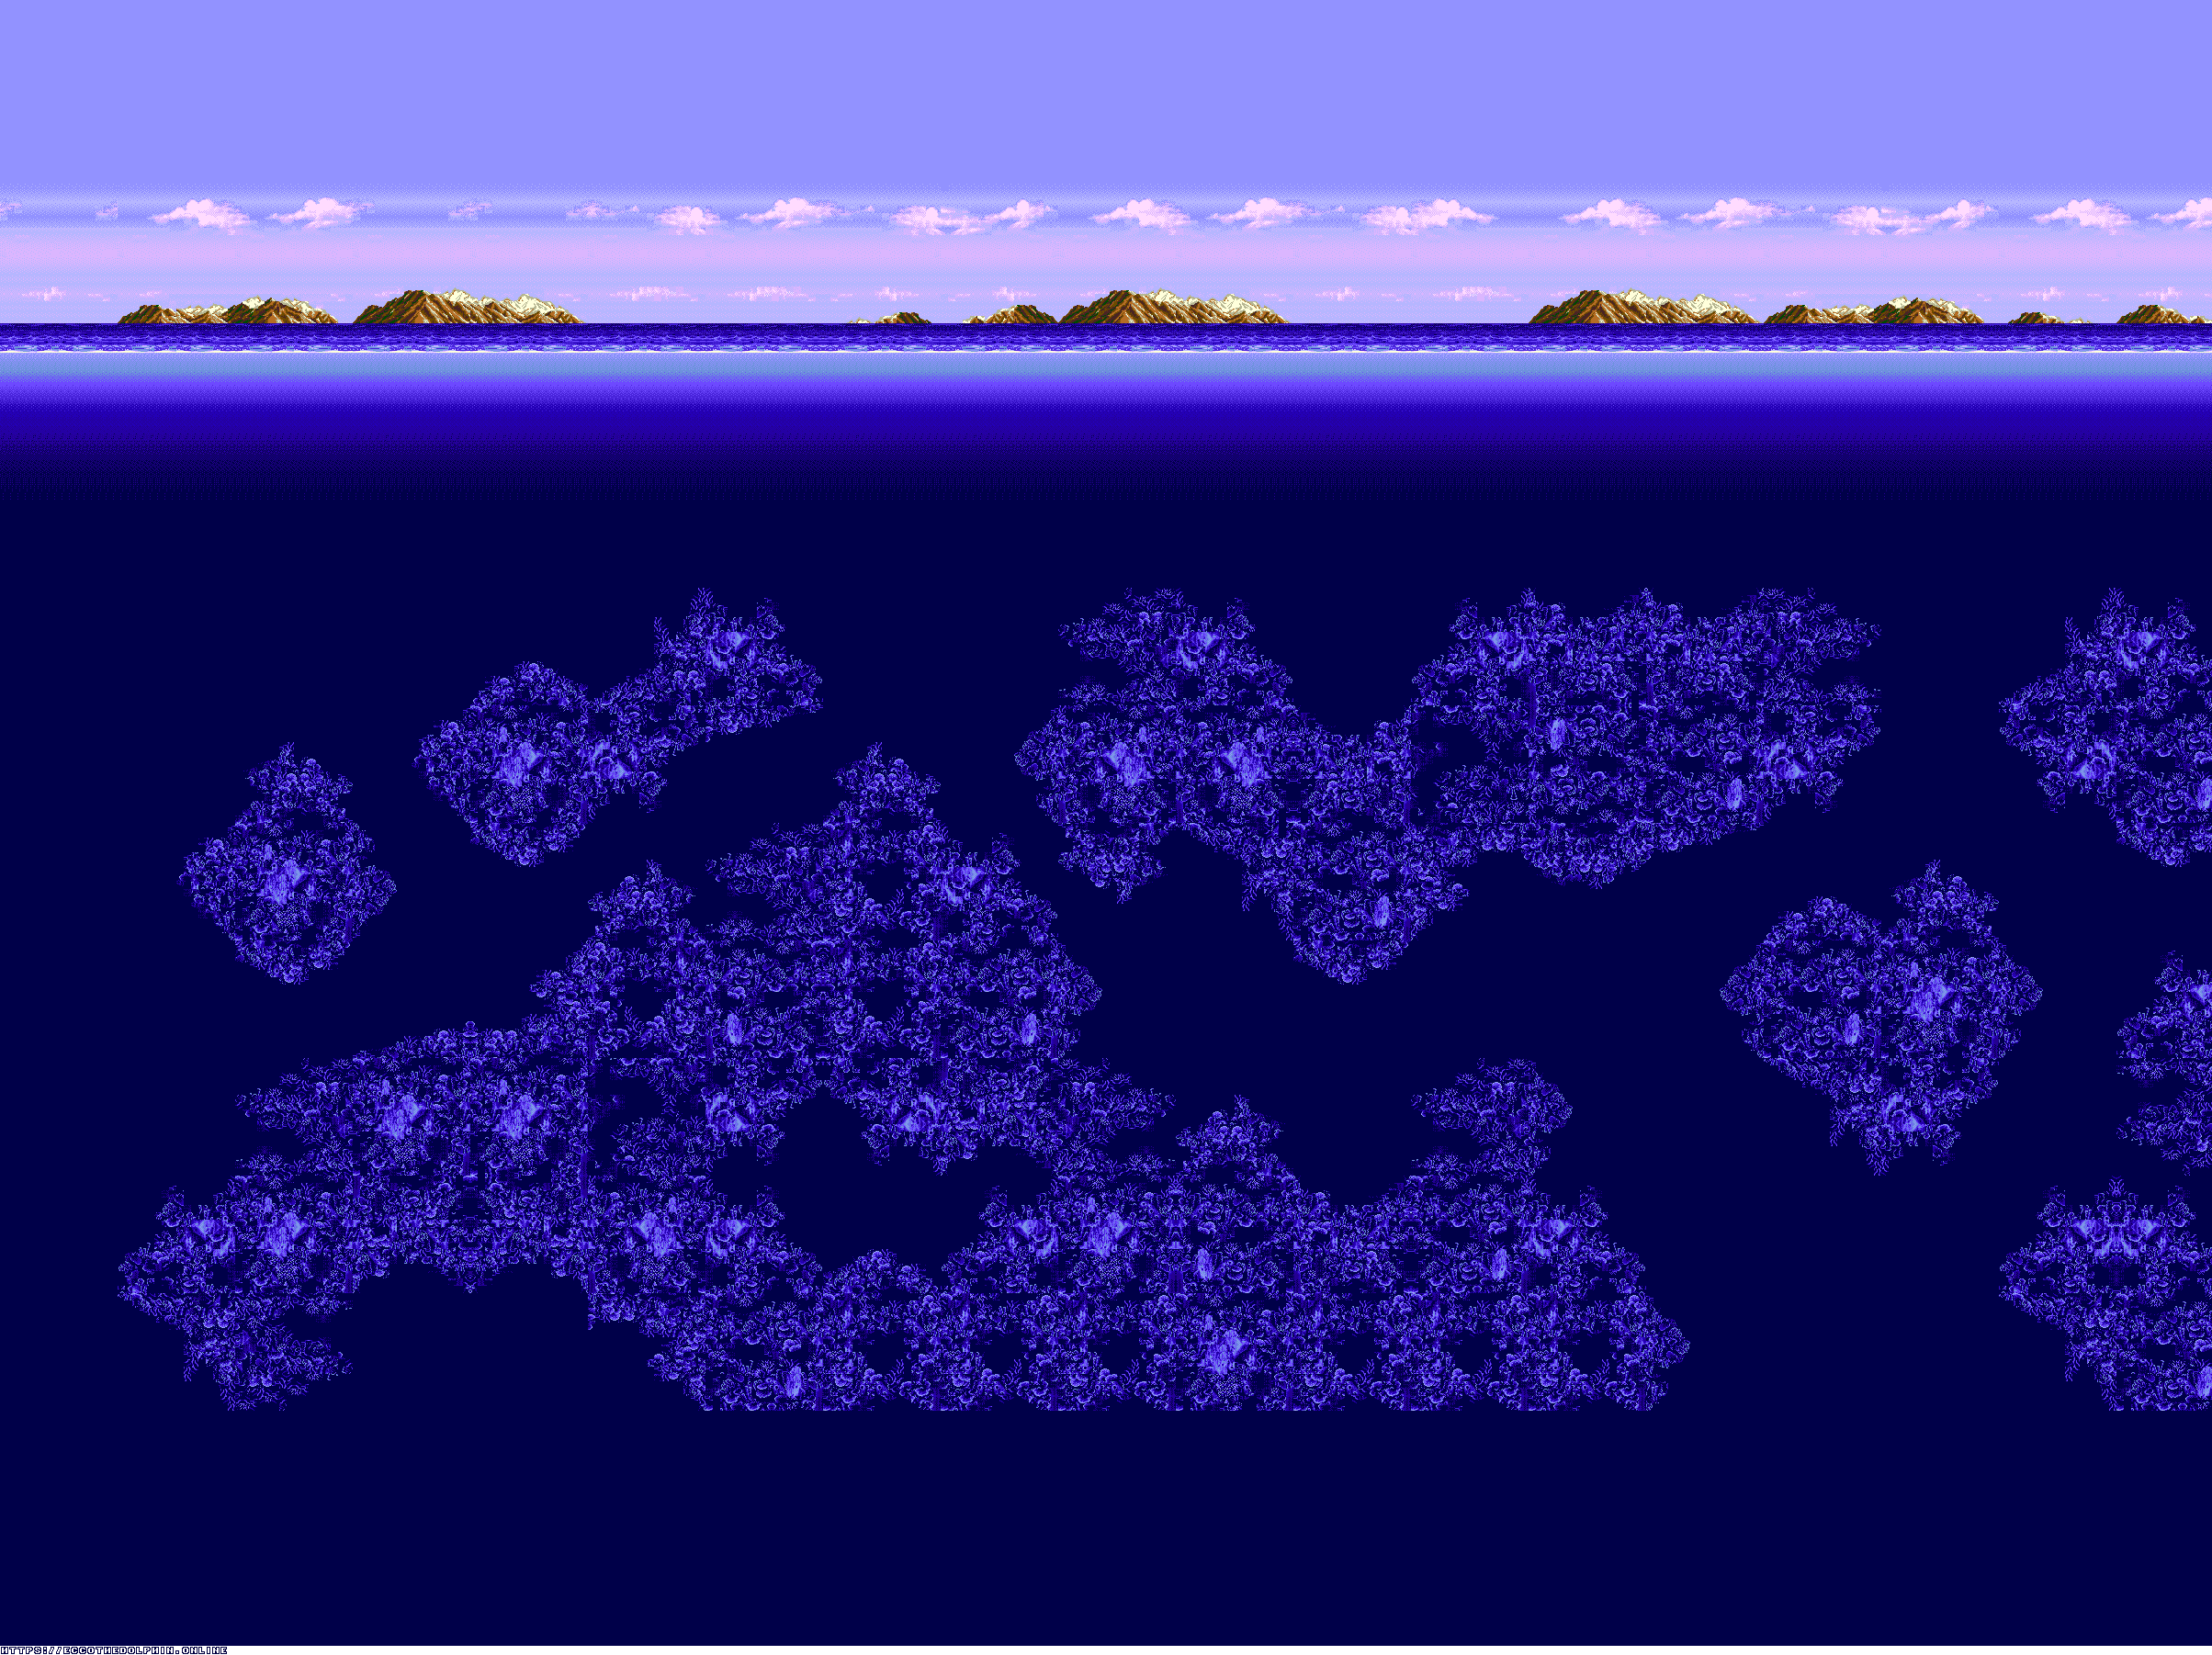 Ecco Jr. - The Ocean of Mimicry (Background)